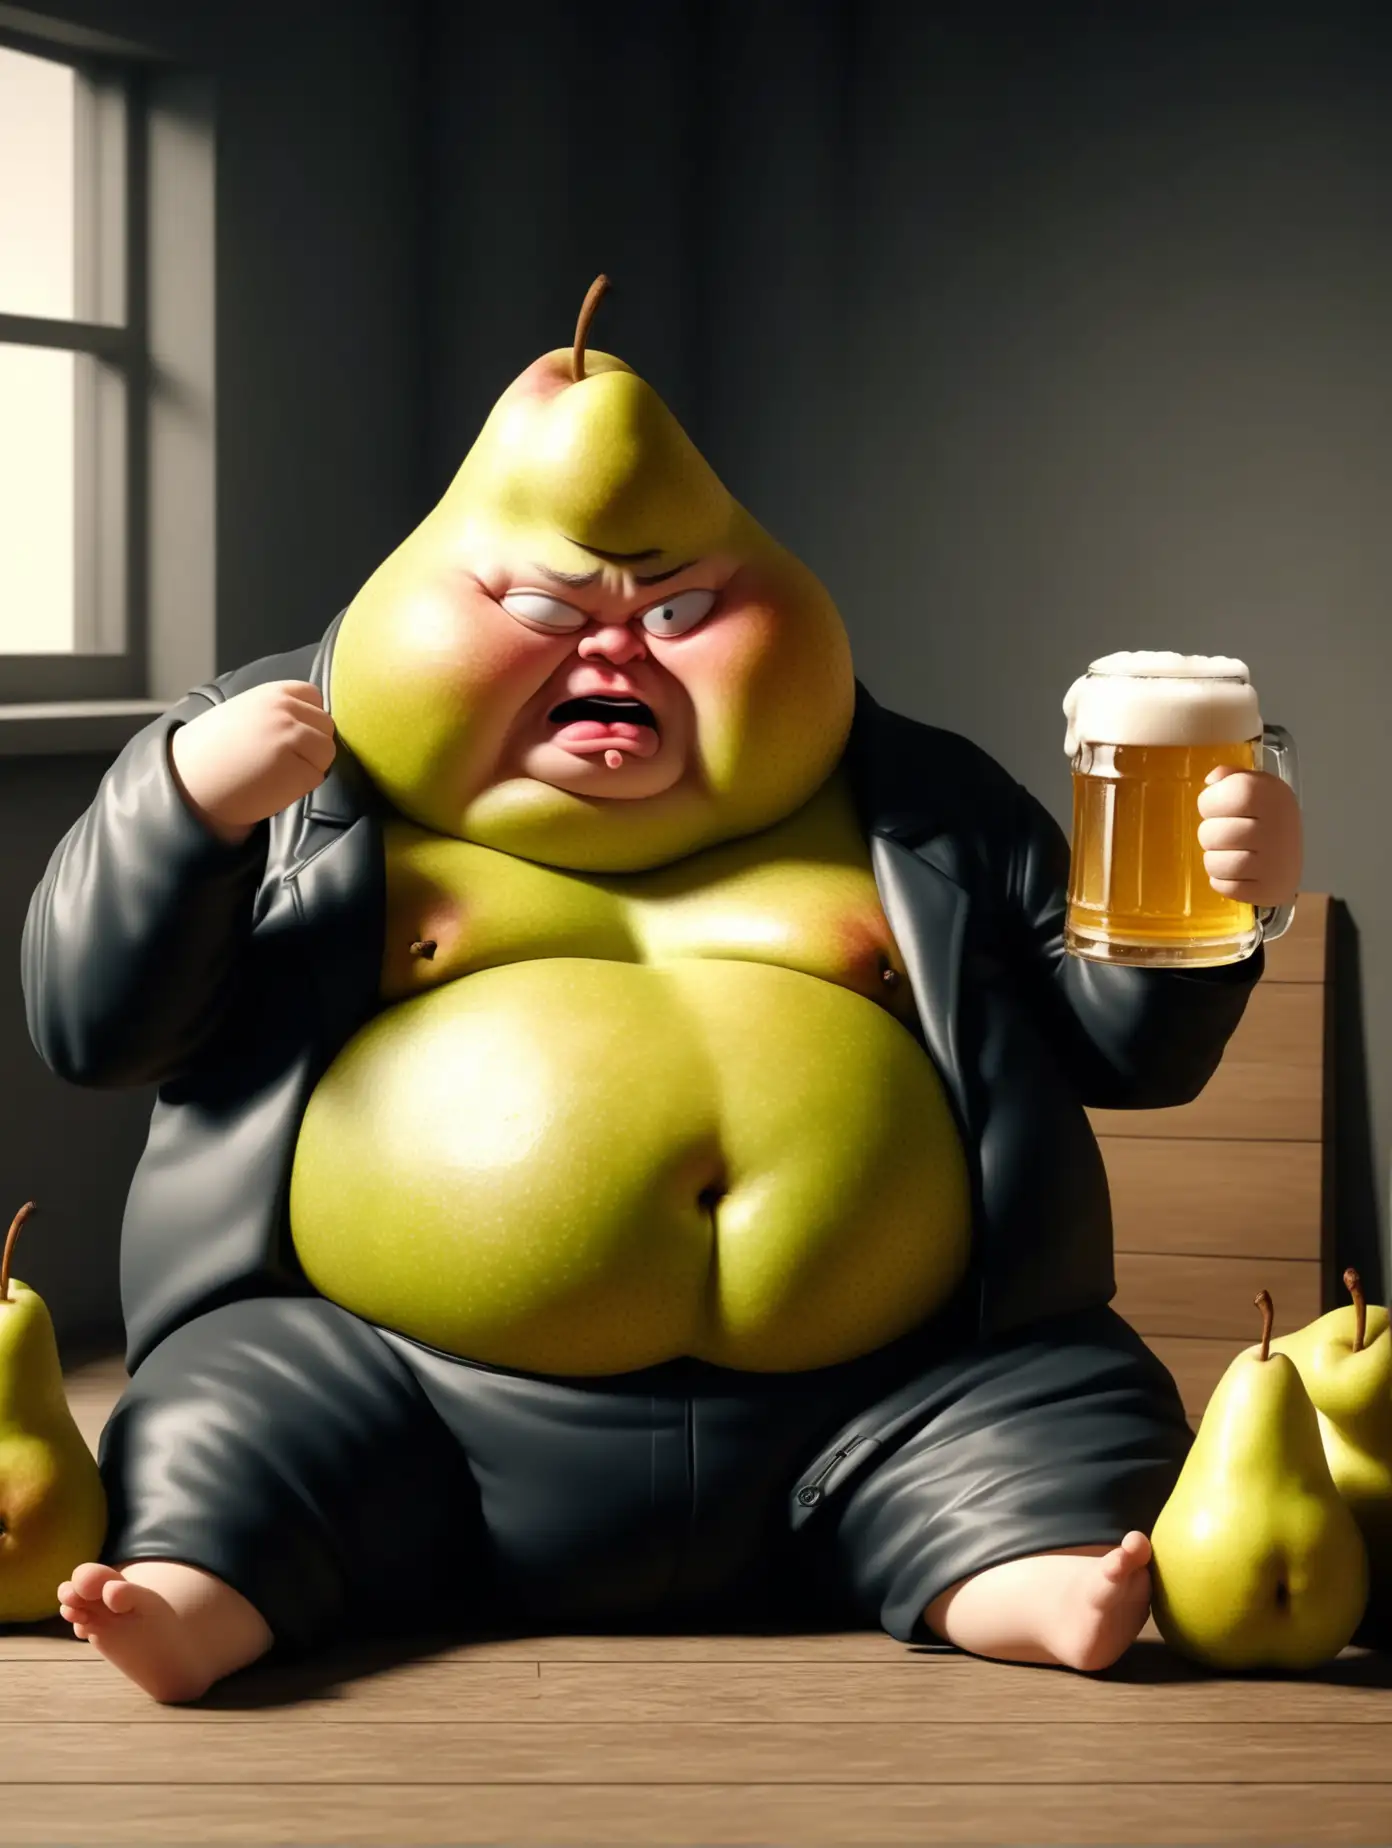 Drunk Pear Fruit Sitting with Beer in Funny Scene